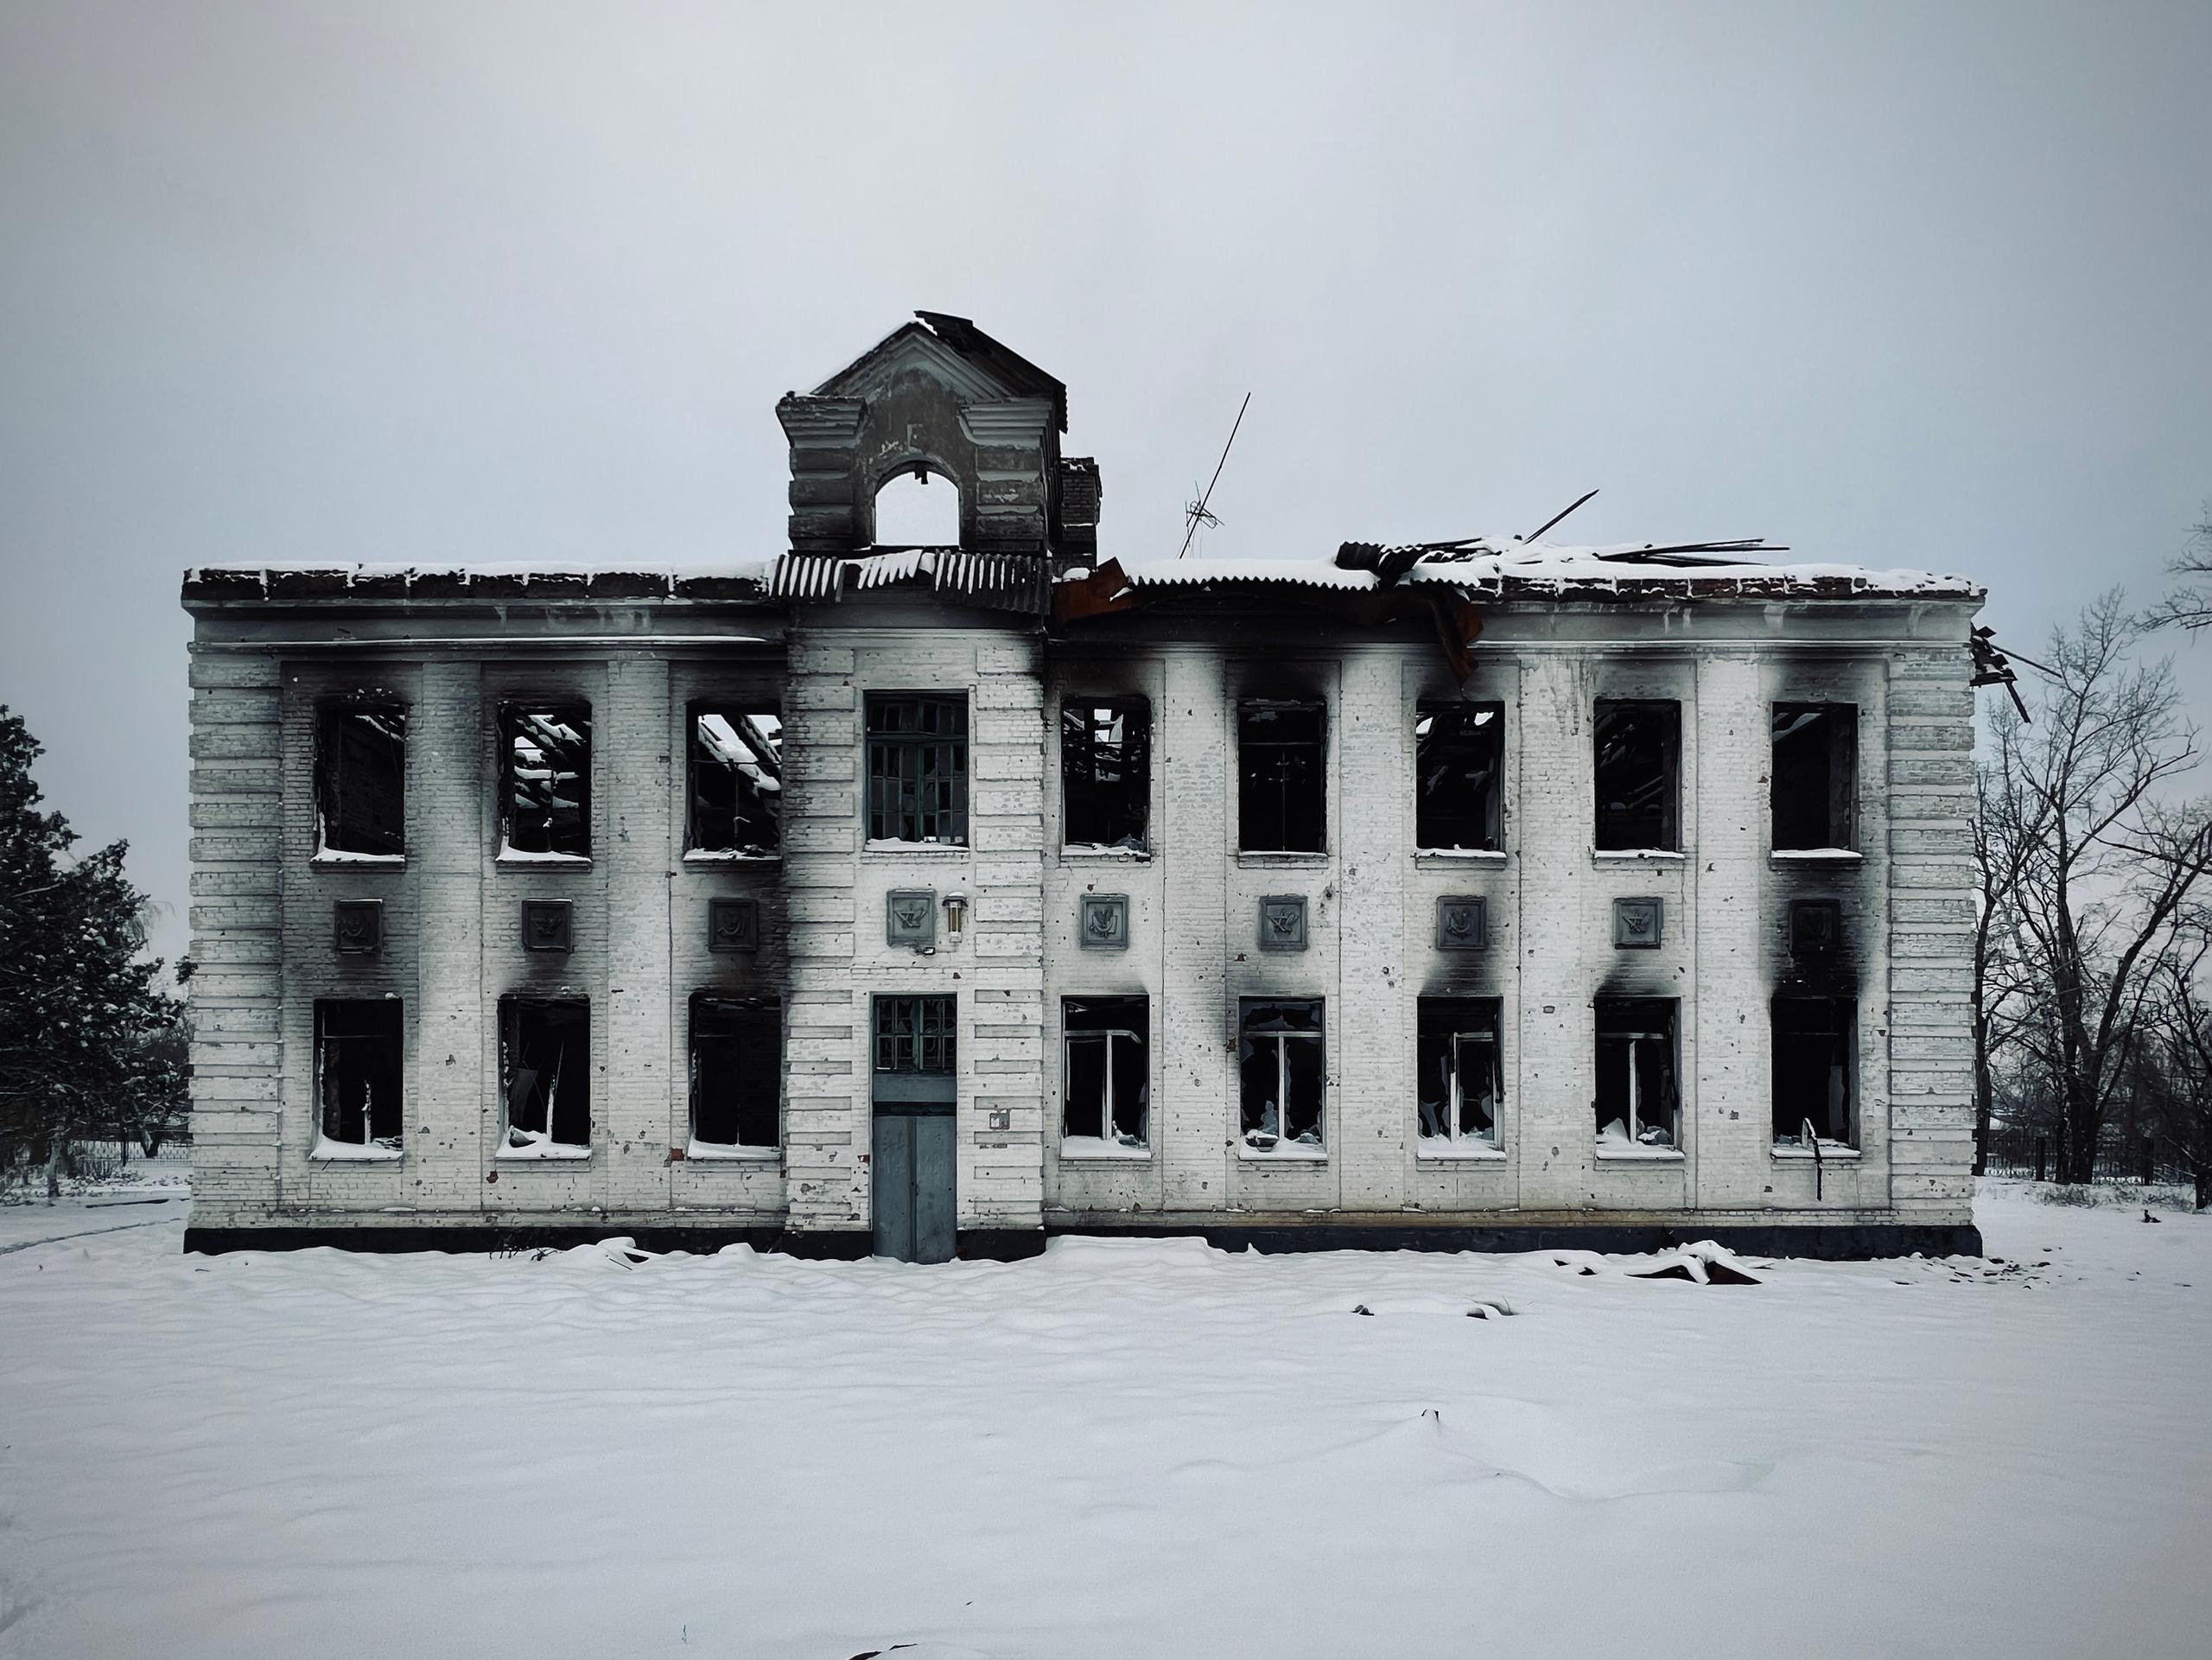 Ukranian school with blown out windows from attacks